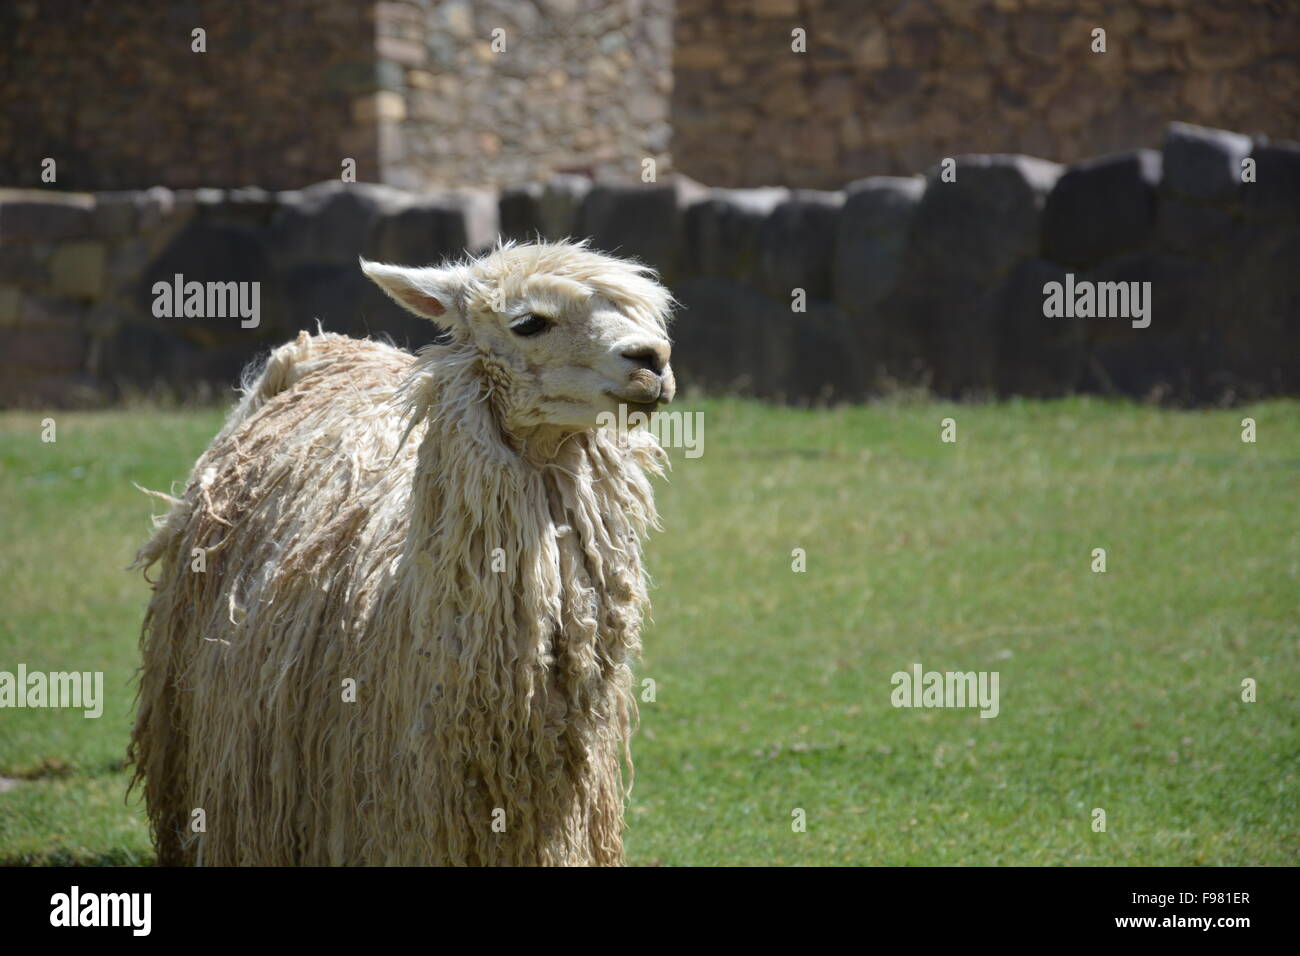 A llama grazes on the grounds of the Inca ruin of Ollantaytambo in the Sacred Valley of Peru. Stock Photo